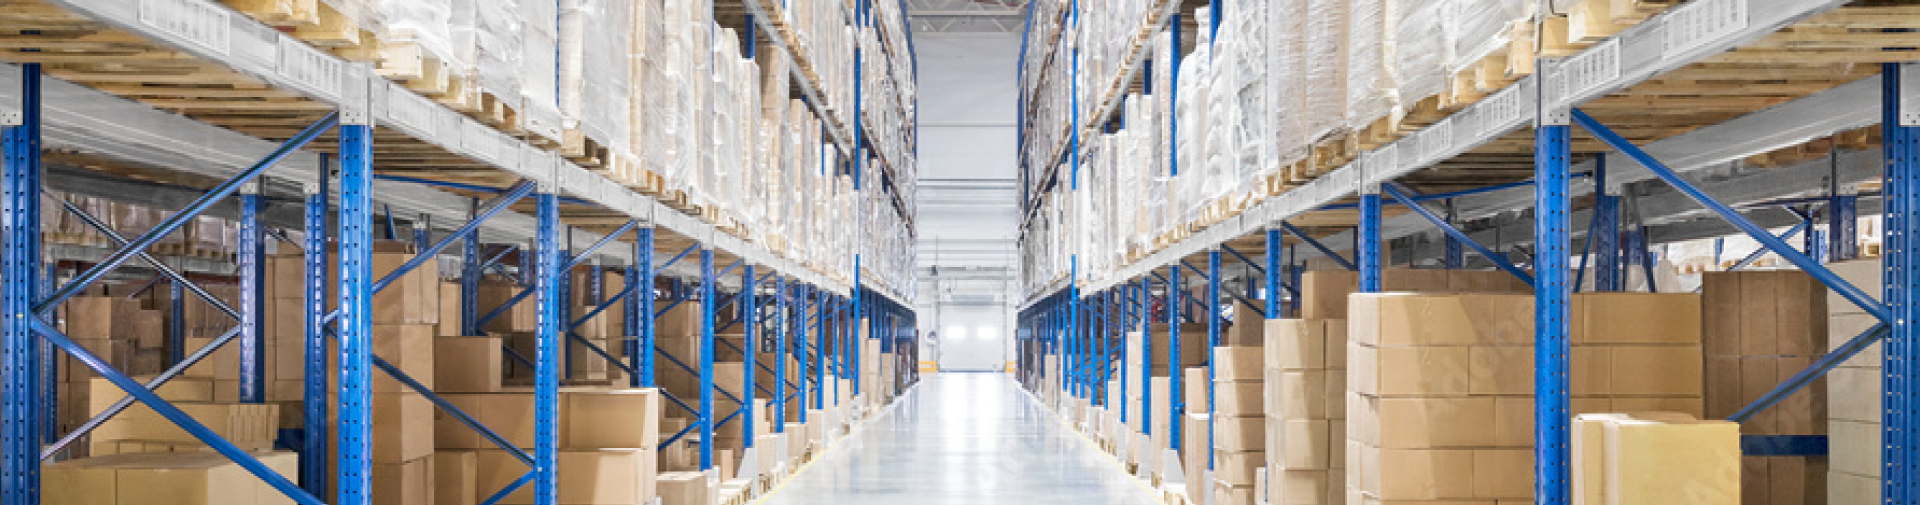 How to Ensure Forklift Safety in Warehouses